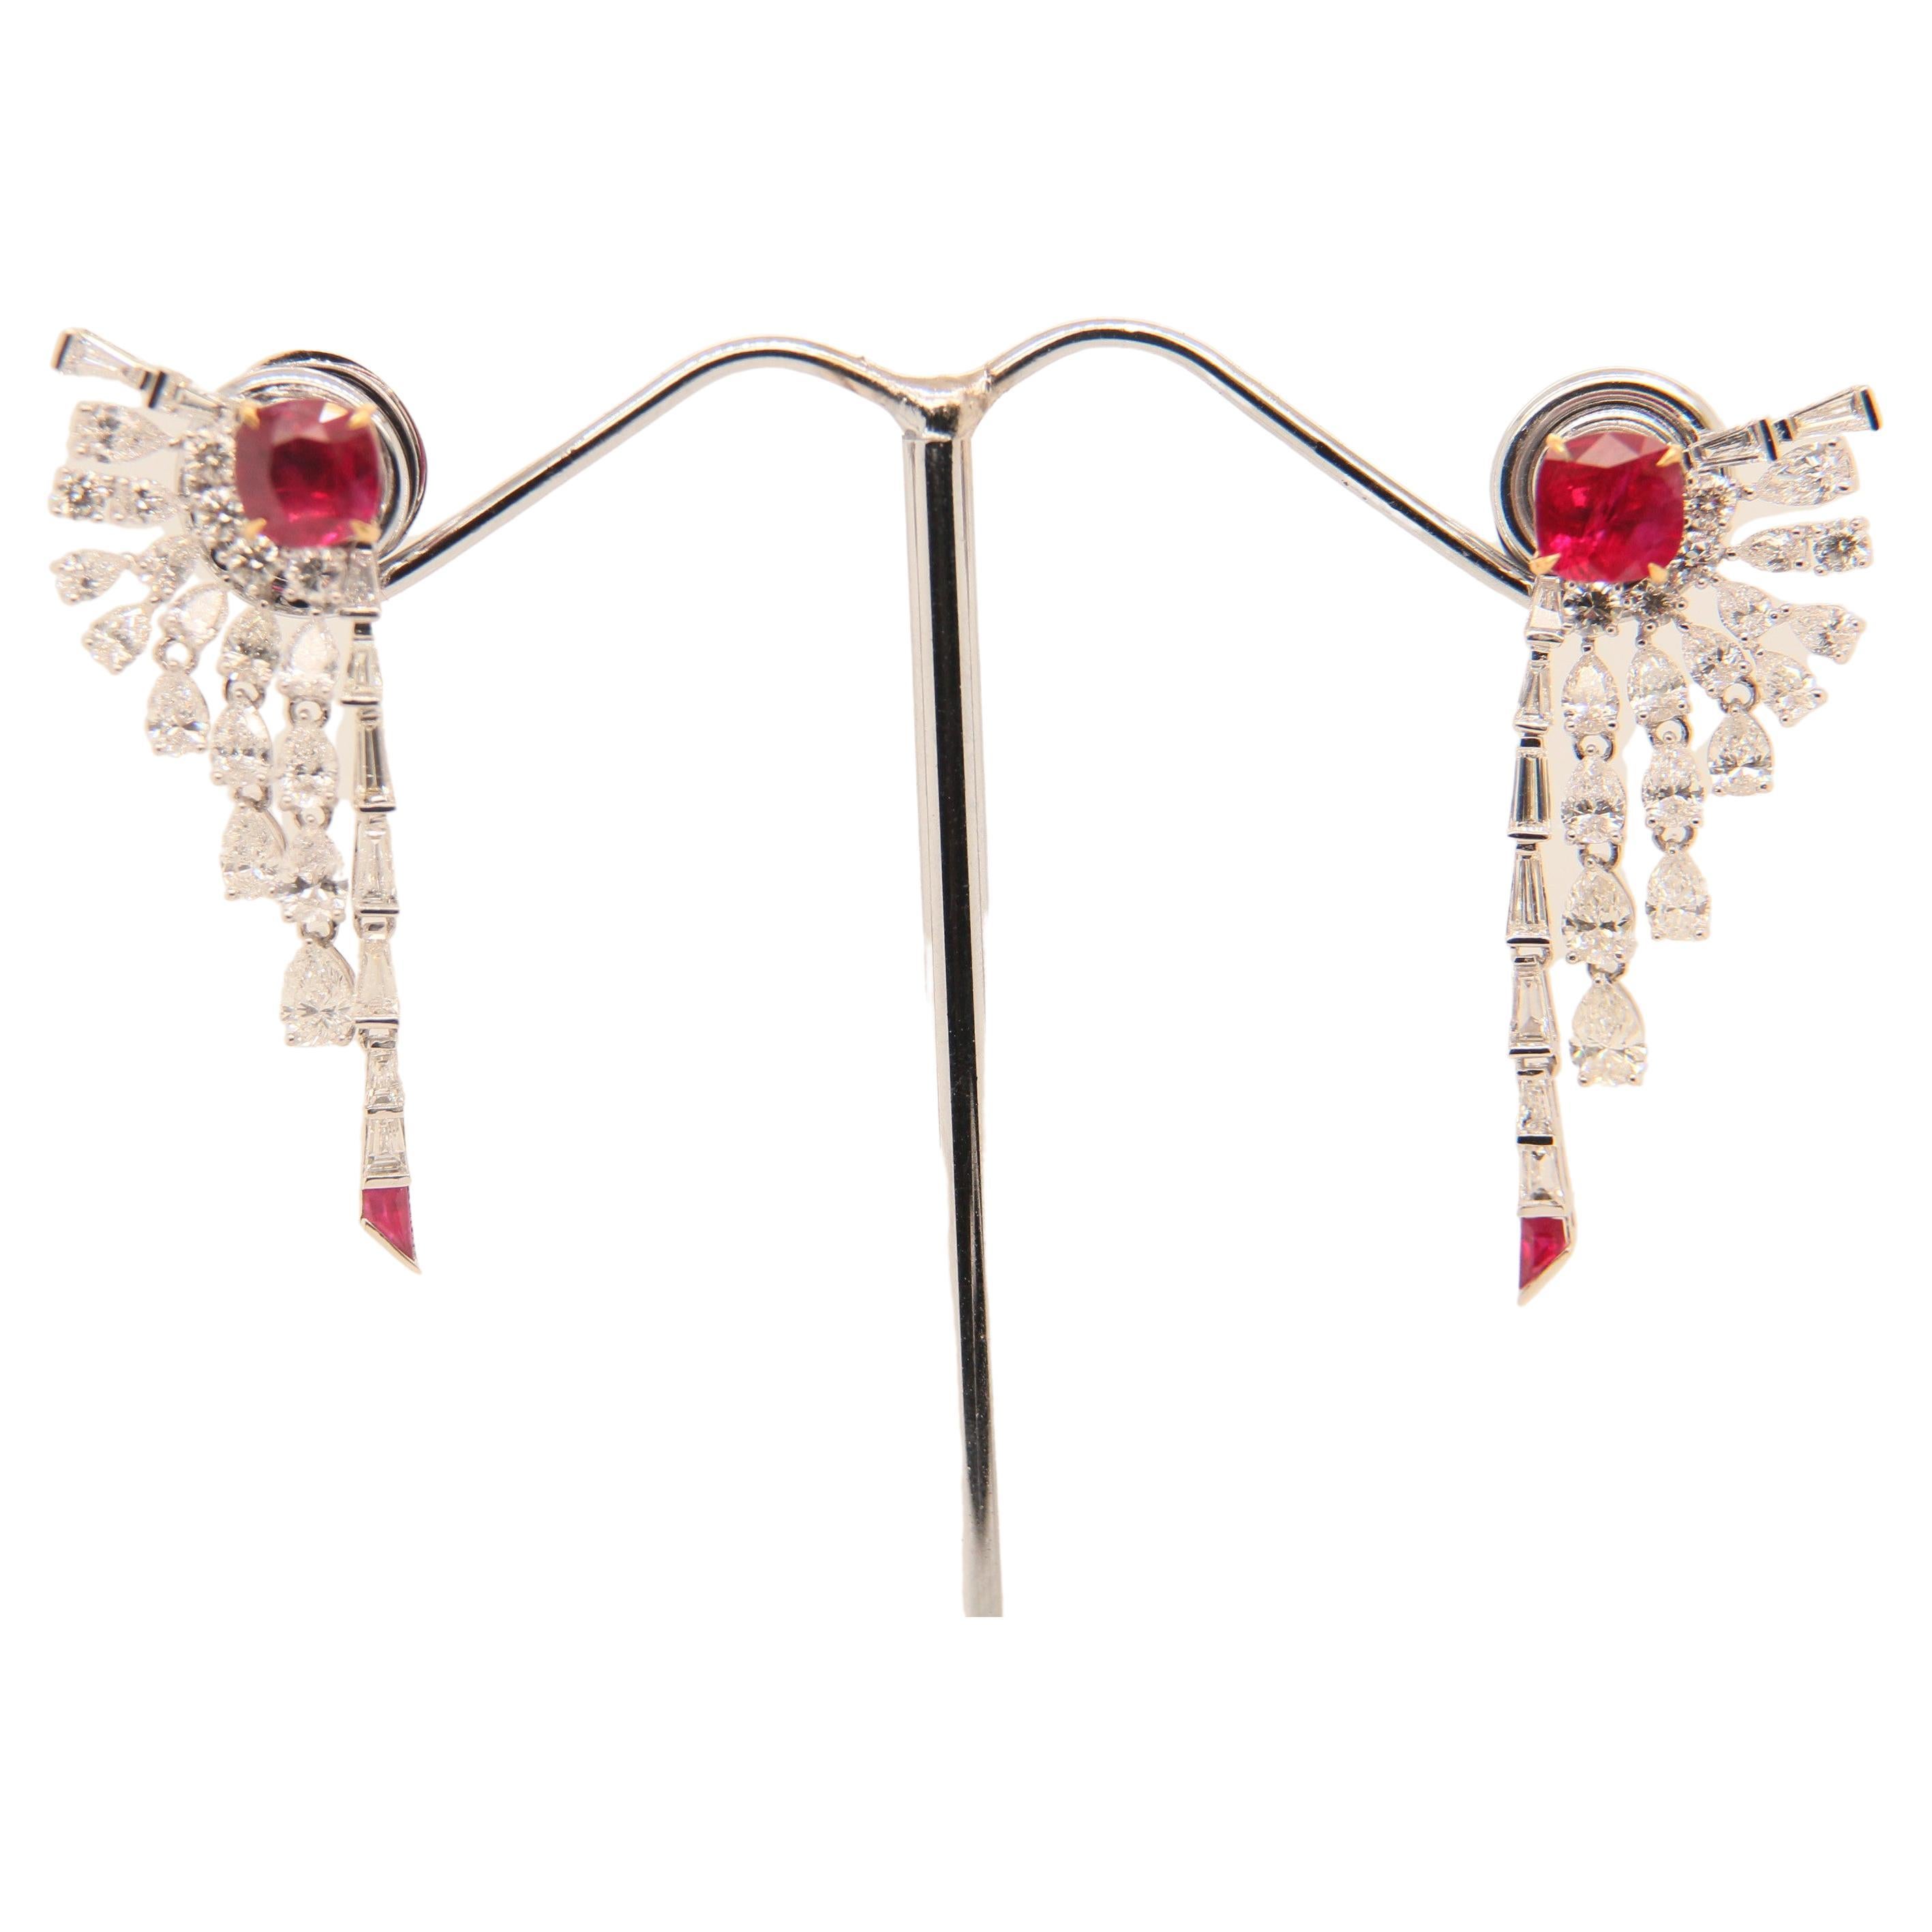 A classic pair of vibrant and rare Burmese ruby and diamond earrings. The ruby's shining luster is complimented by the sparkling diamonds, this showcases the elegance of the piece . This classic and fun piece will not only help to exude confidence